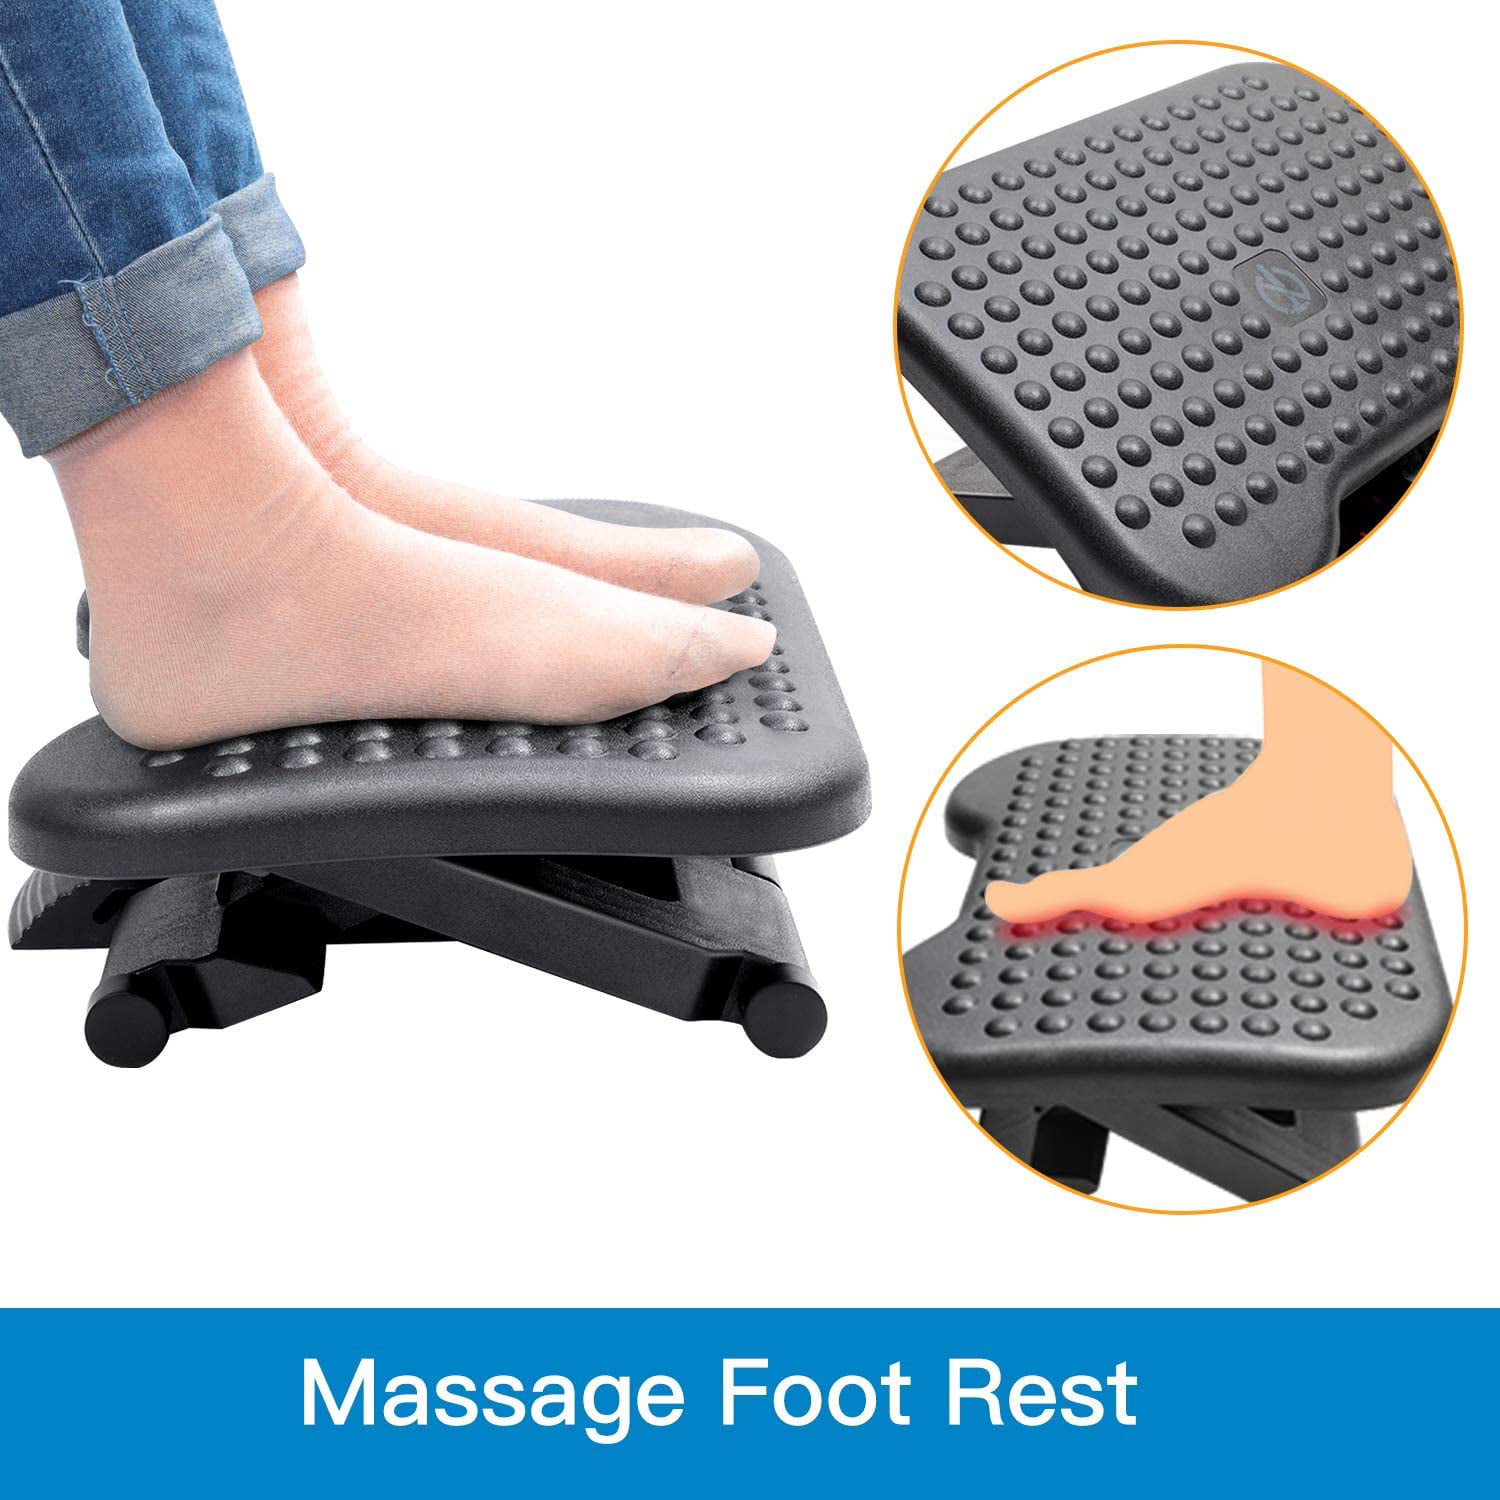 Foot Rest for Under Desk at Work Toilet Stool with Massage Roller Adjustable Height Ergonomic Feet and Leg Rest Pillow for Desk Office Study Gray